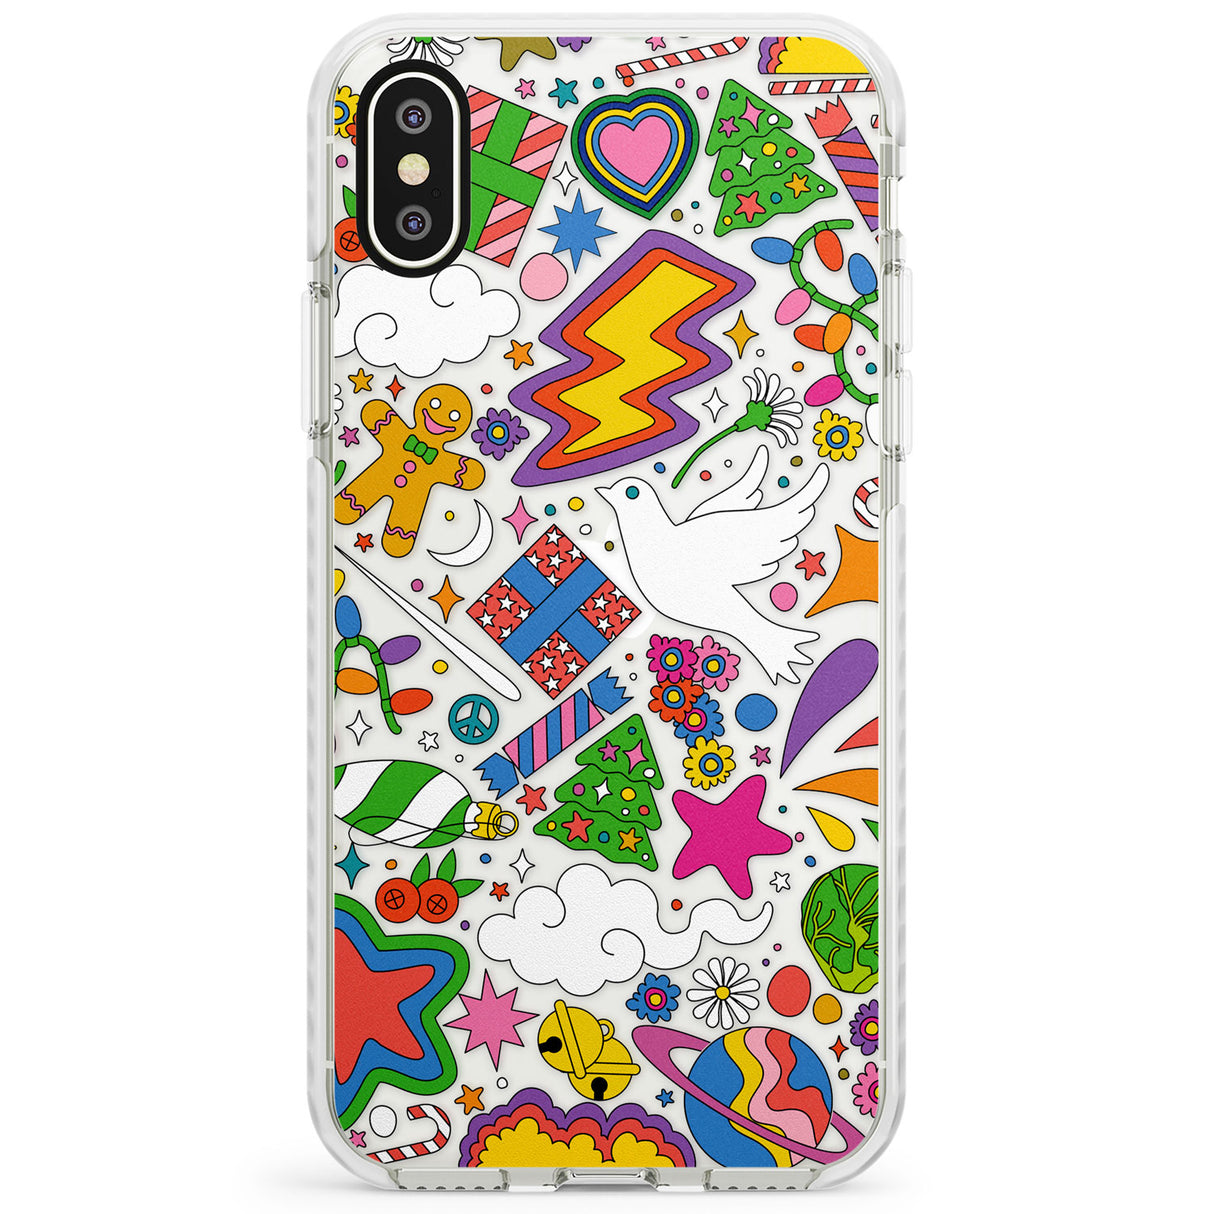 Whimsical Wonderland Impact Phone Case for iPhone X XS Max XR